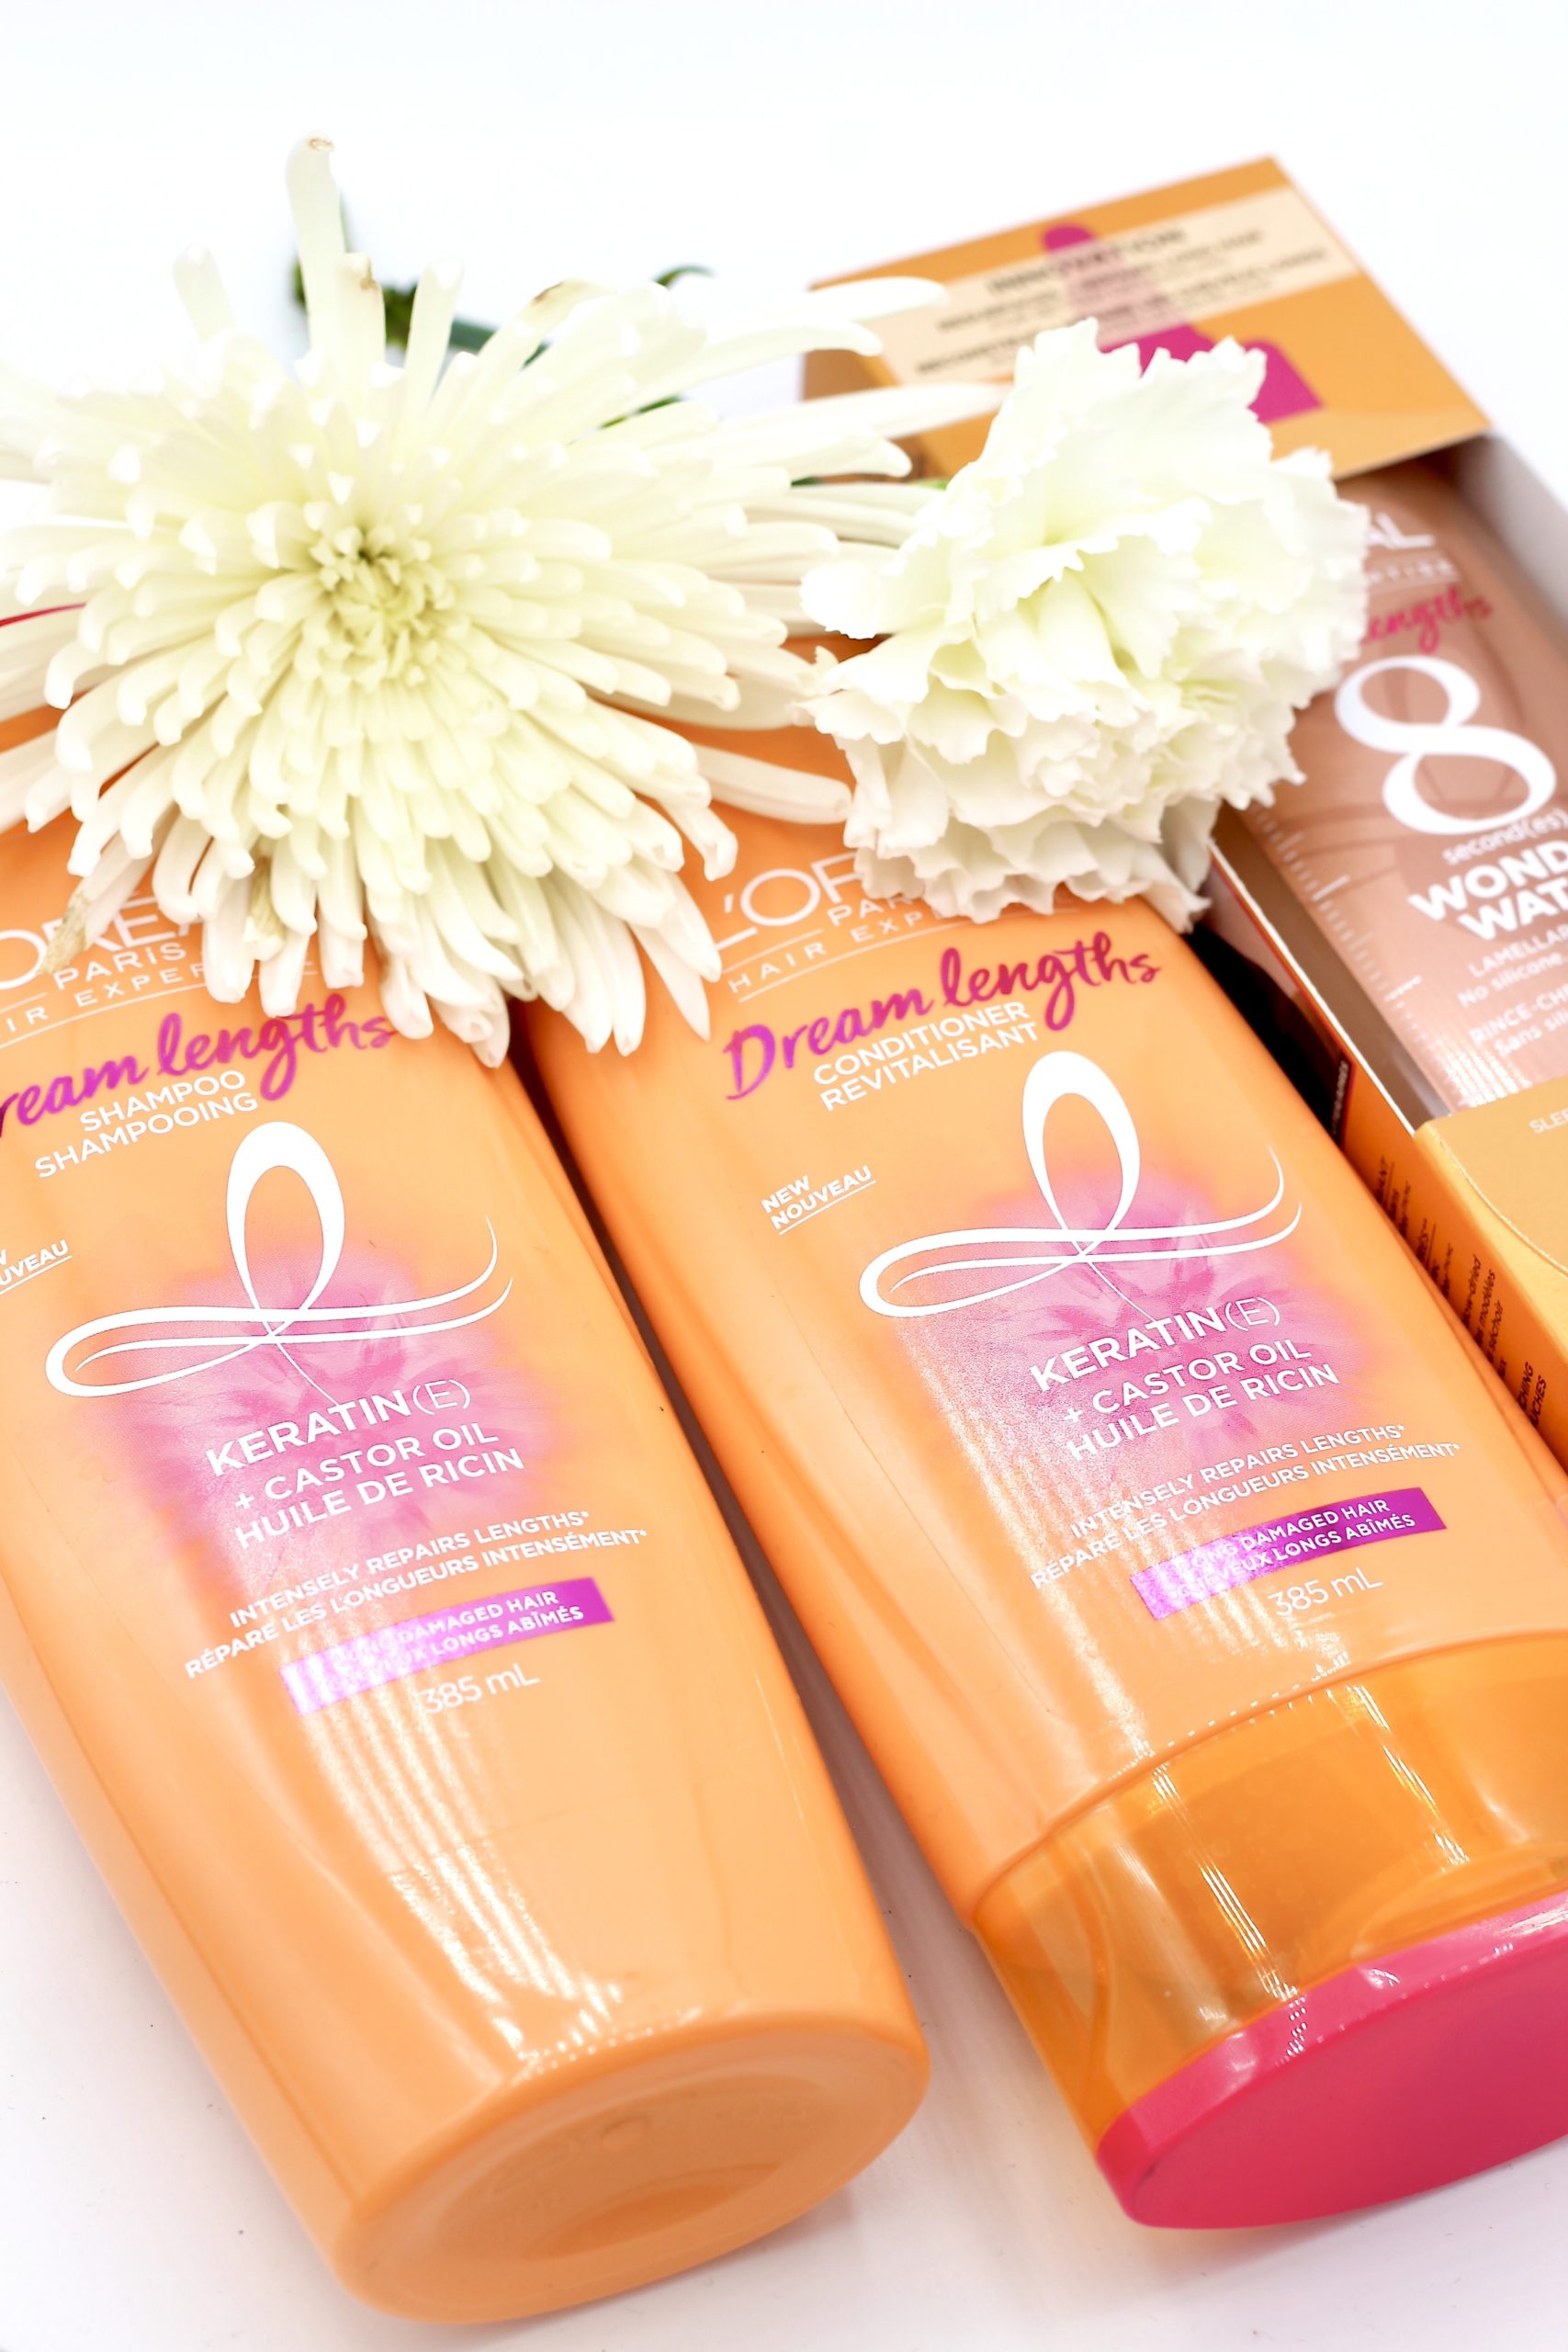 L'Oreal Dream Lengths Haircare review